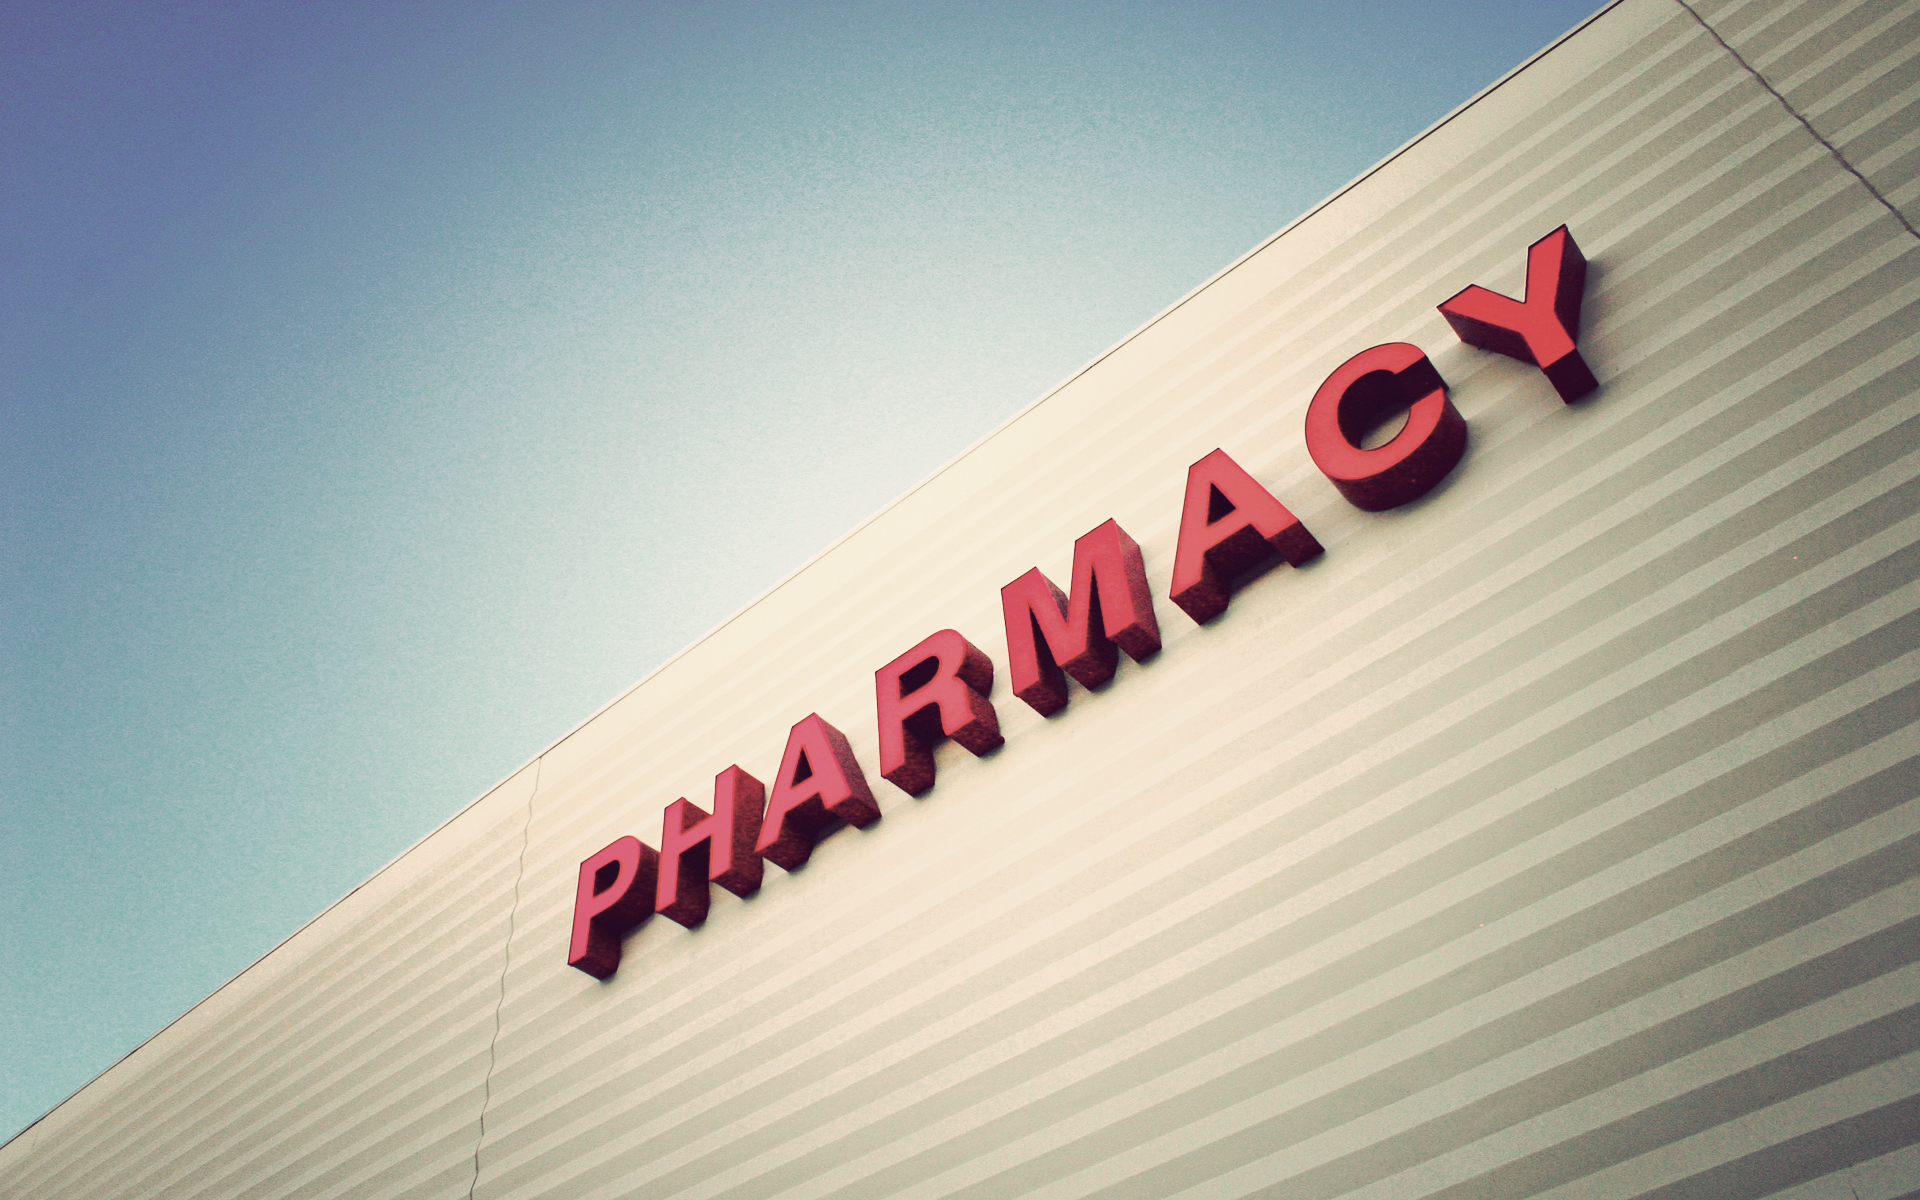 Pharmacy Hd Wallpaper Top Pictures Gallery Online 1920x1200